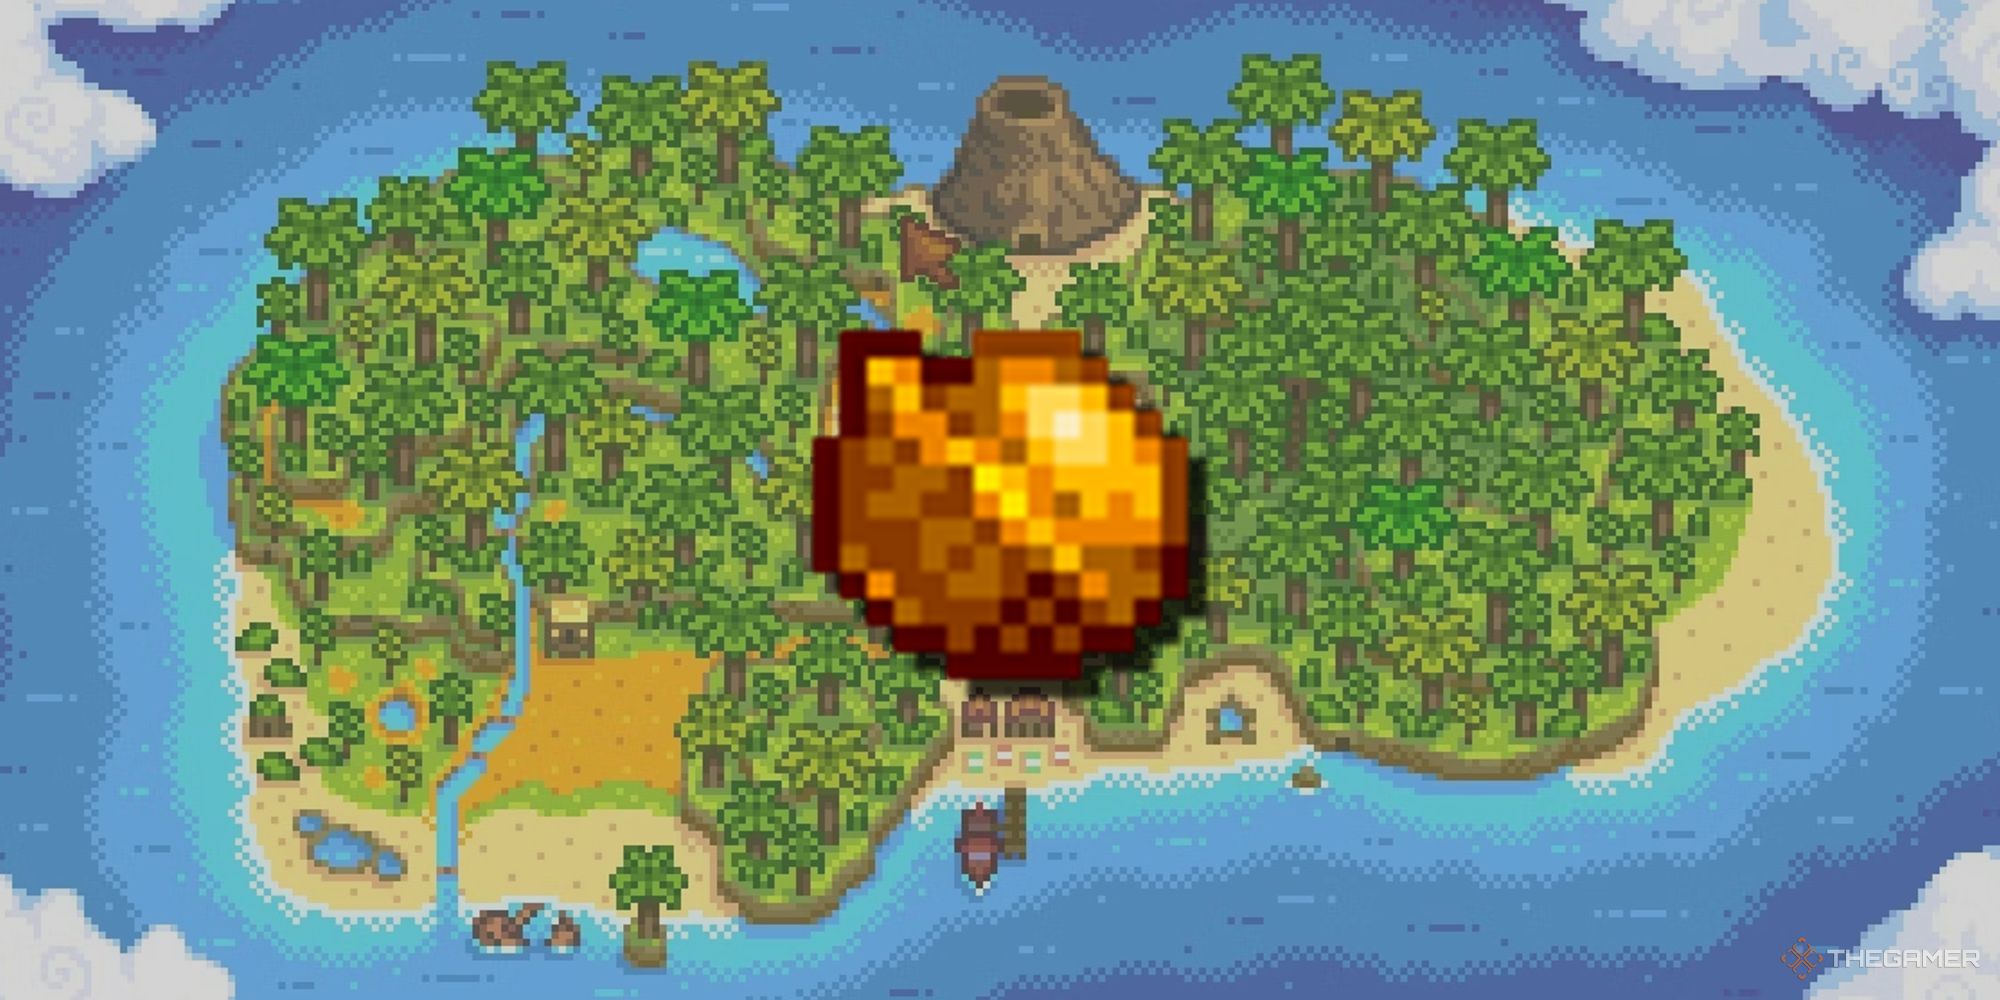 stardew valley map of ginger island with golden walnut png over it